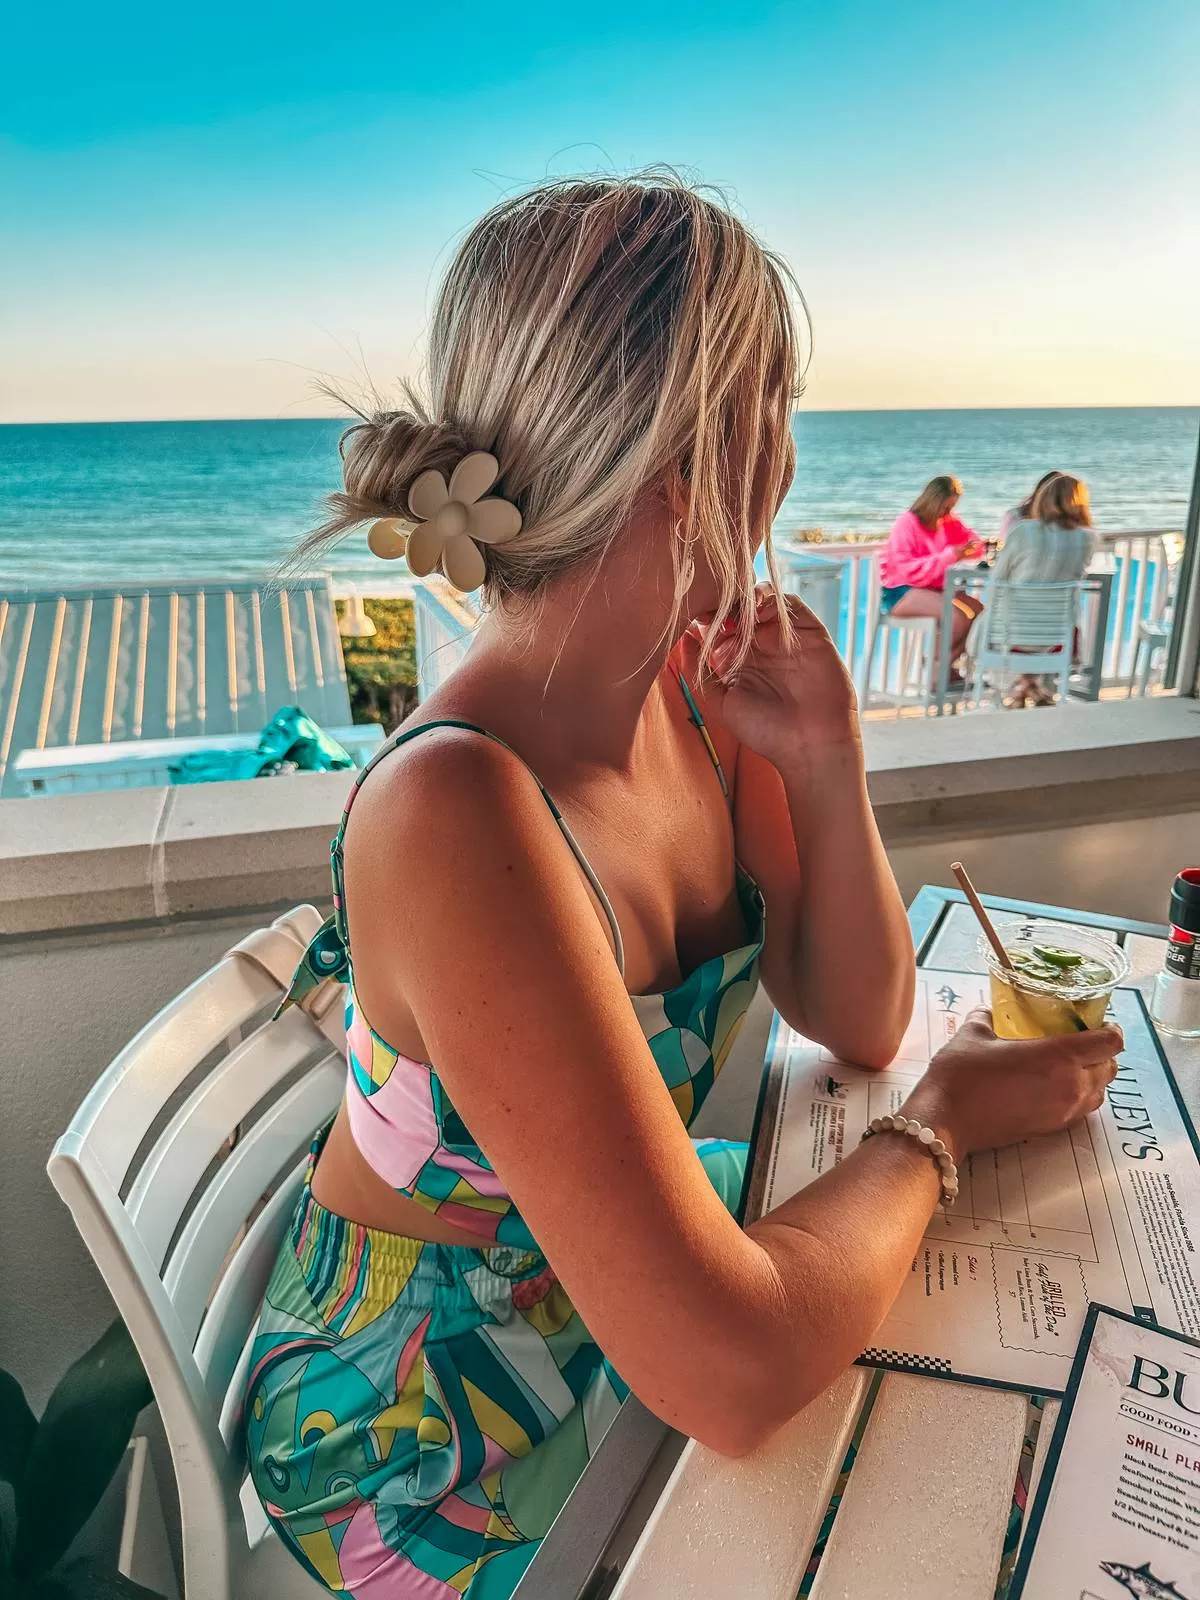 Bud and Alley's rooftop bar at sunset in 30A